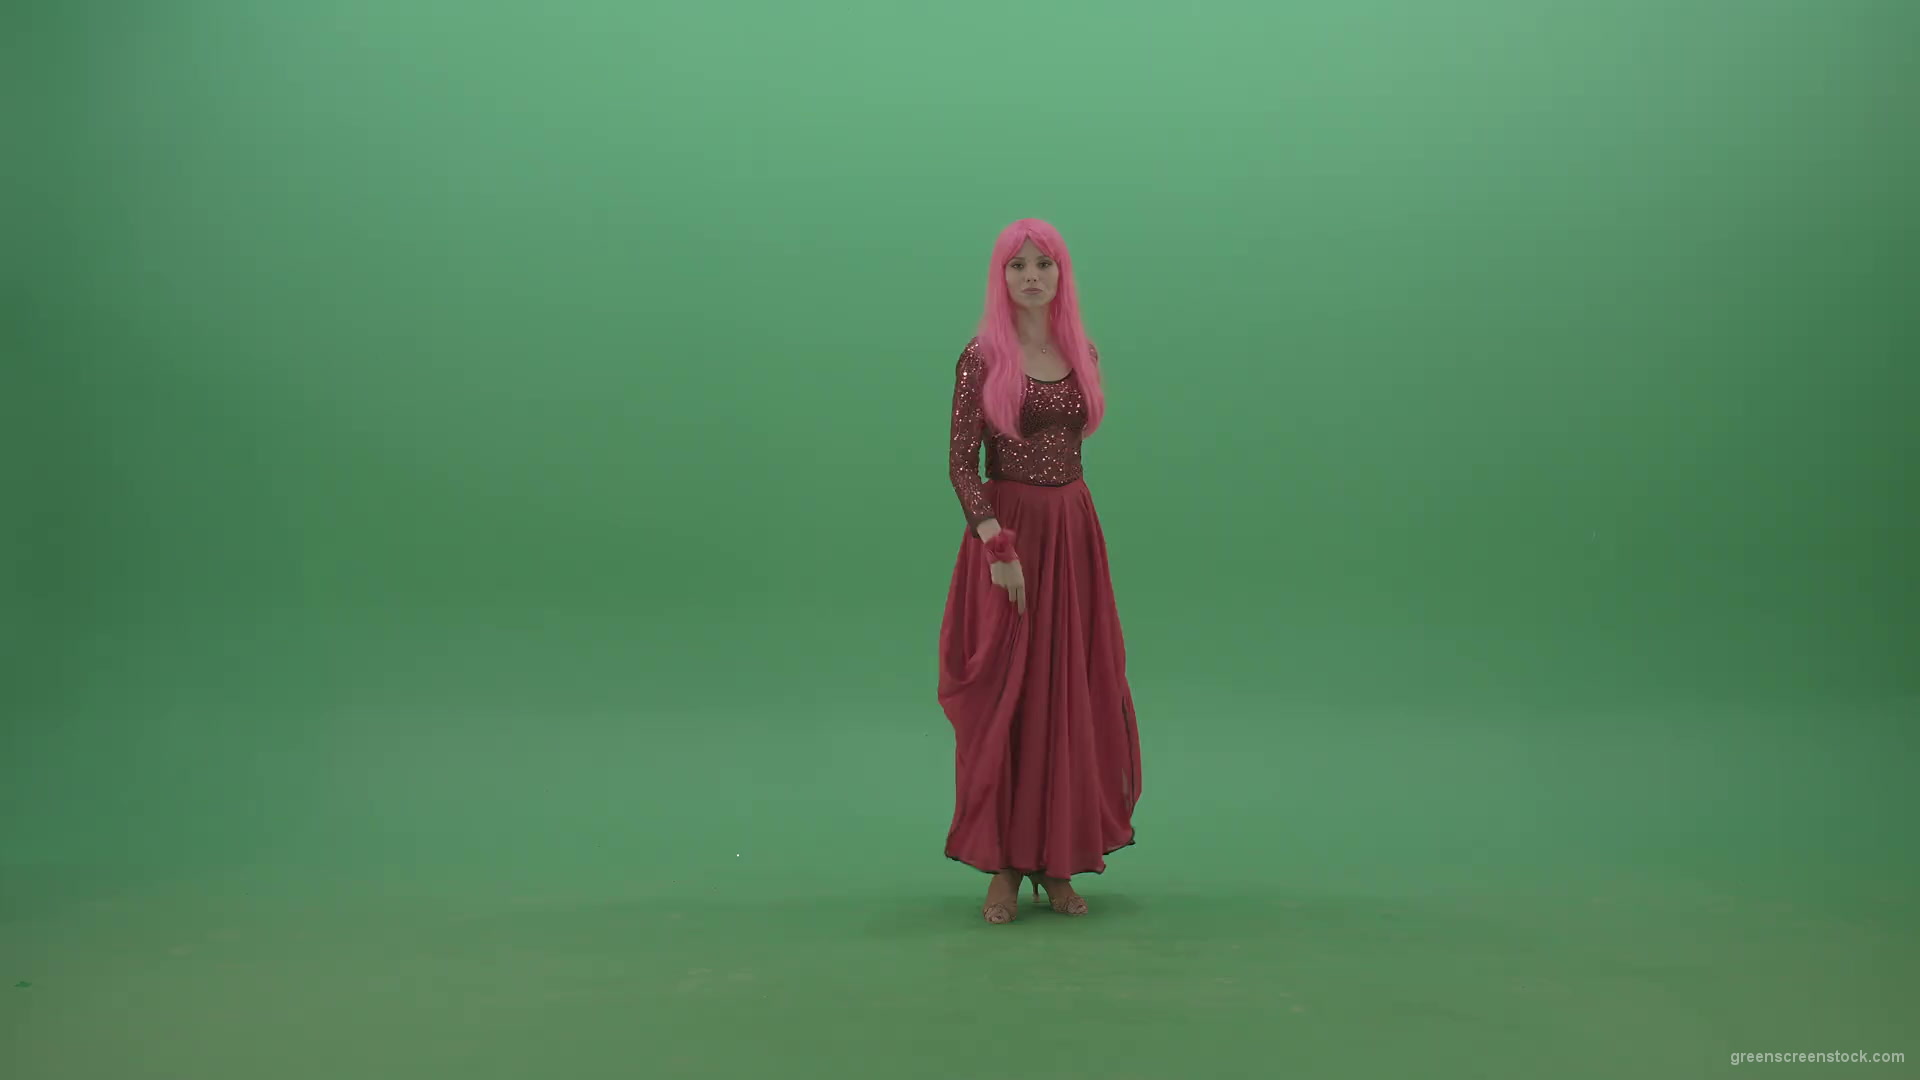 Beautiful-girl-in-red-dress-and-pink-hair-dancing-flamenco-and-spinning-on-green-screen-4K-Video-Footage-1920_001 Green Screen Stock